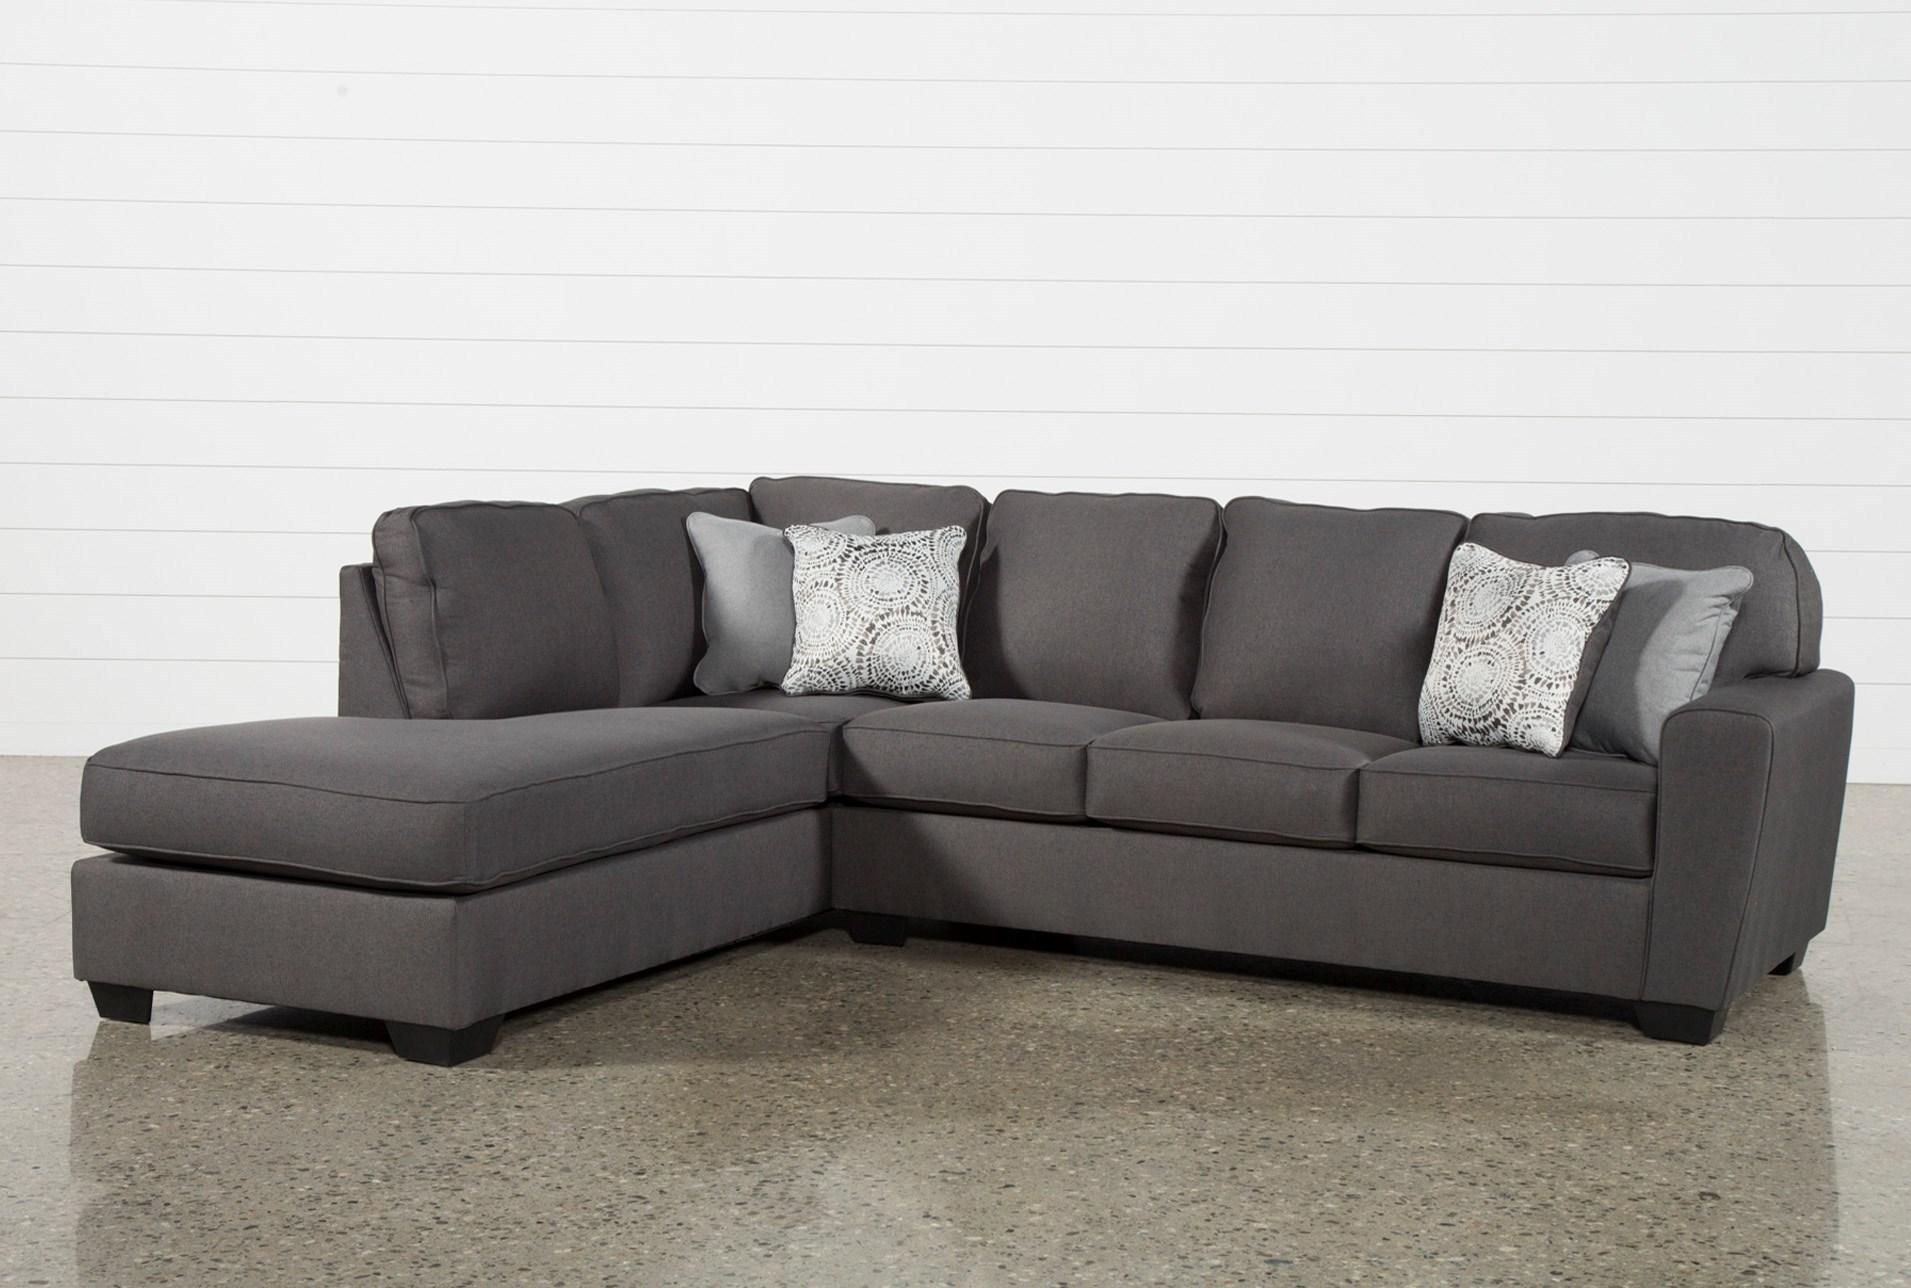 Mcdade Graphite 2 Piece Sectional W/laf Chaise | Graphite, Living Regarding Alder 4 Piece Sectionals (View 11 of 25)